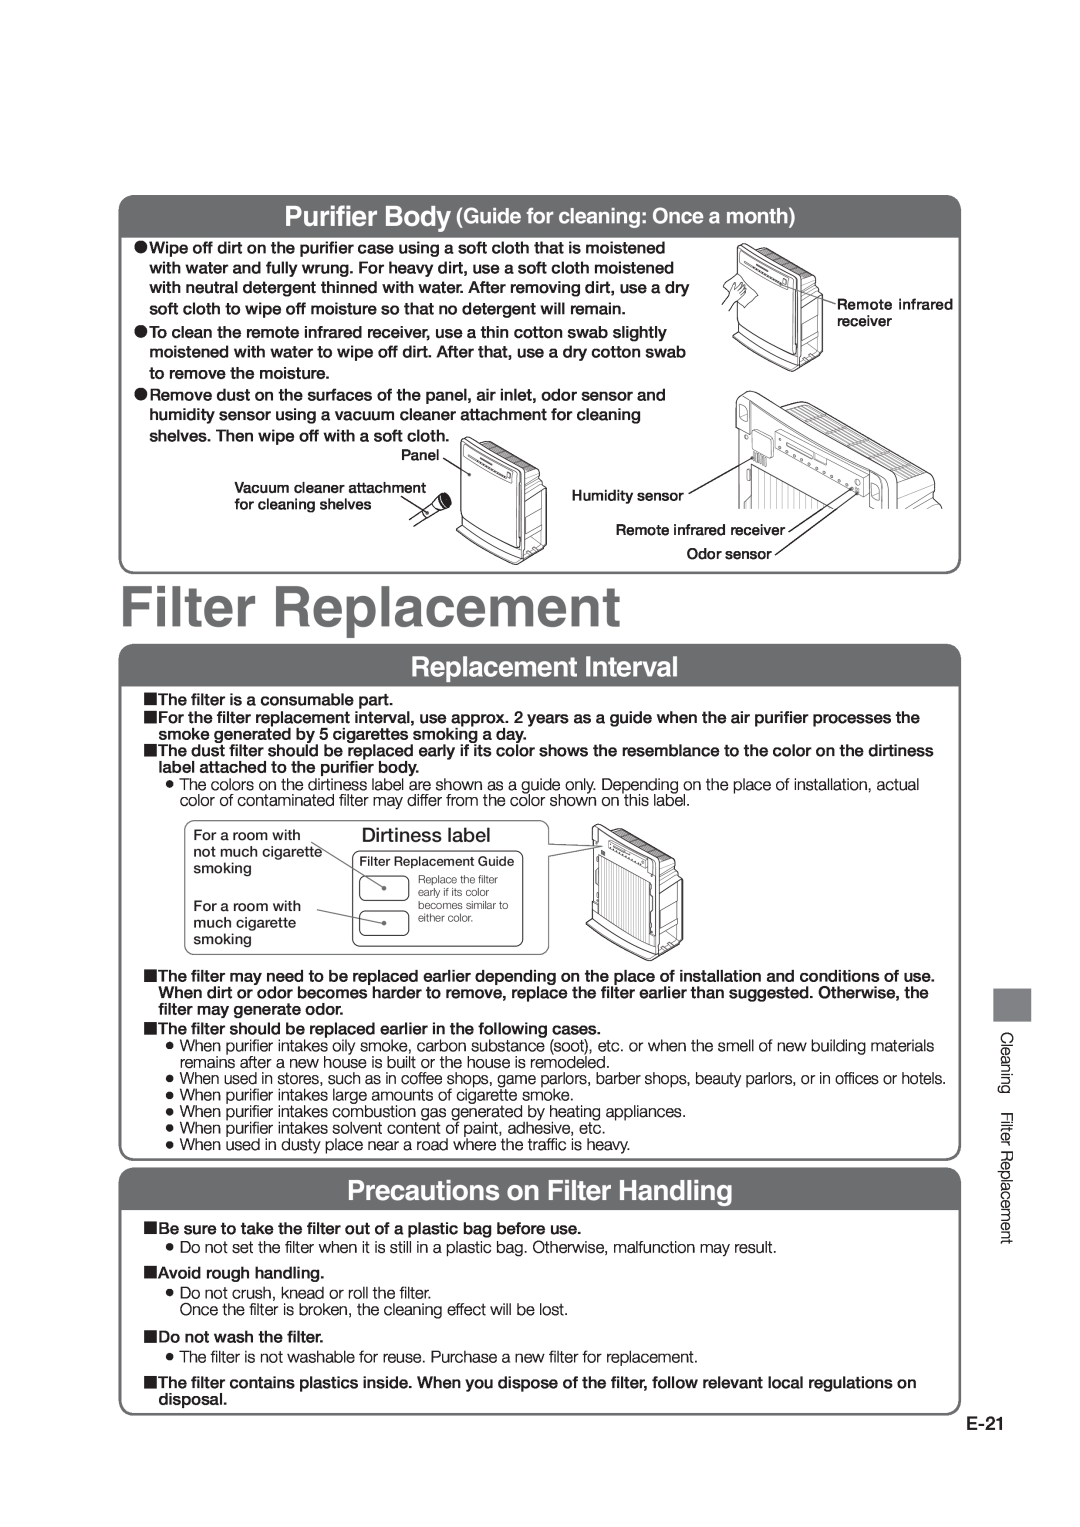 Hitachi hitachi air purifier with humidifying function instruction manual Filter Replacement, Replacement Interval, E-21 